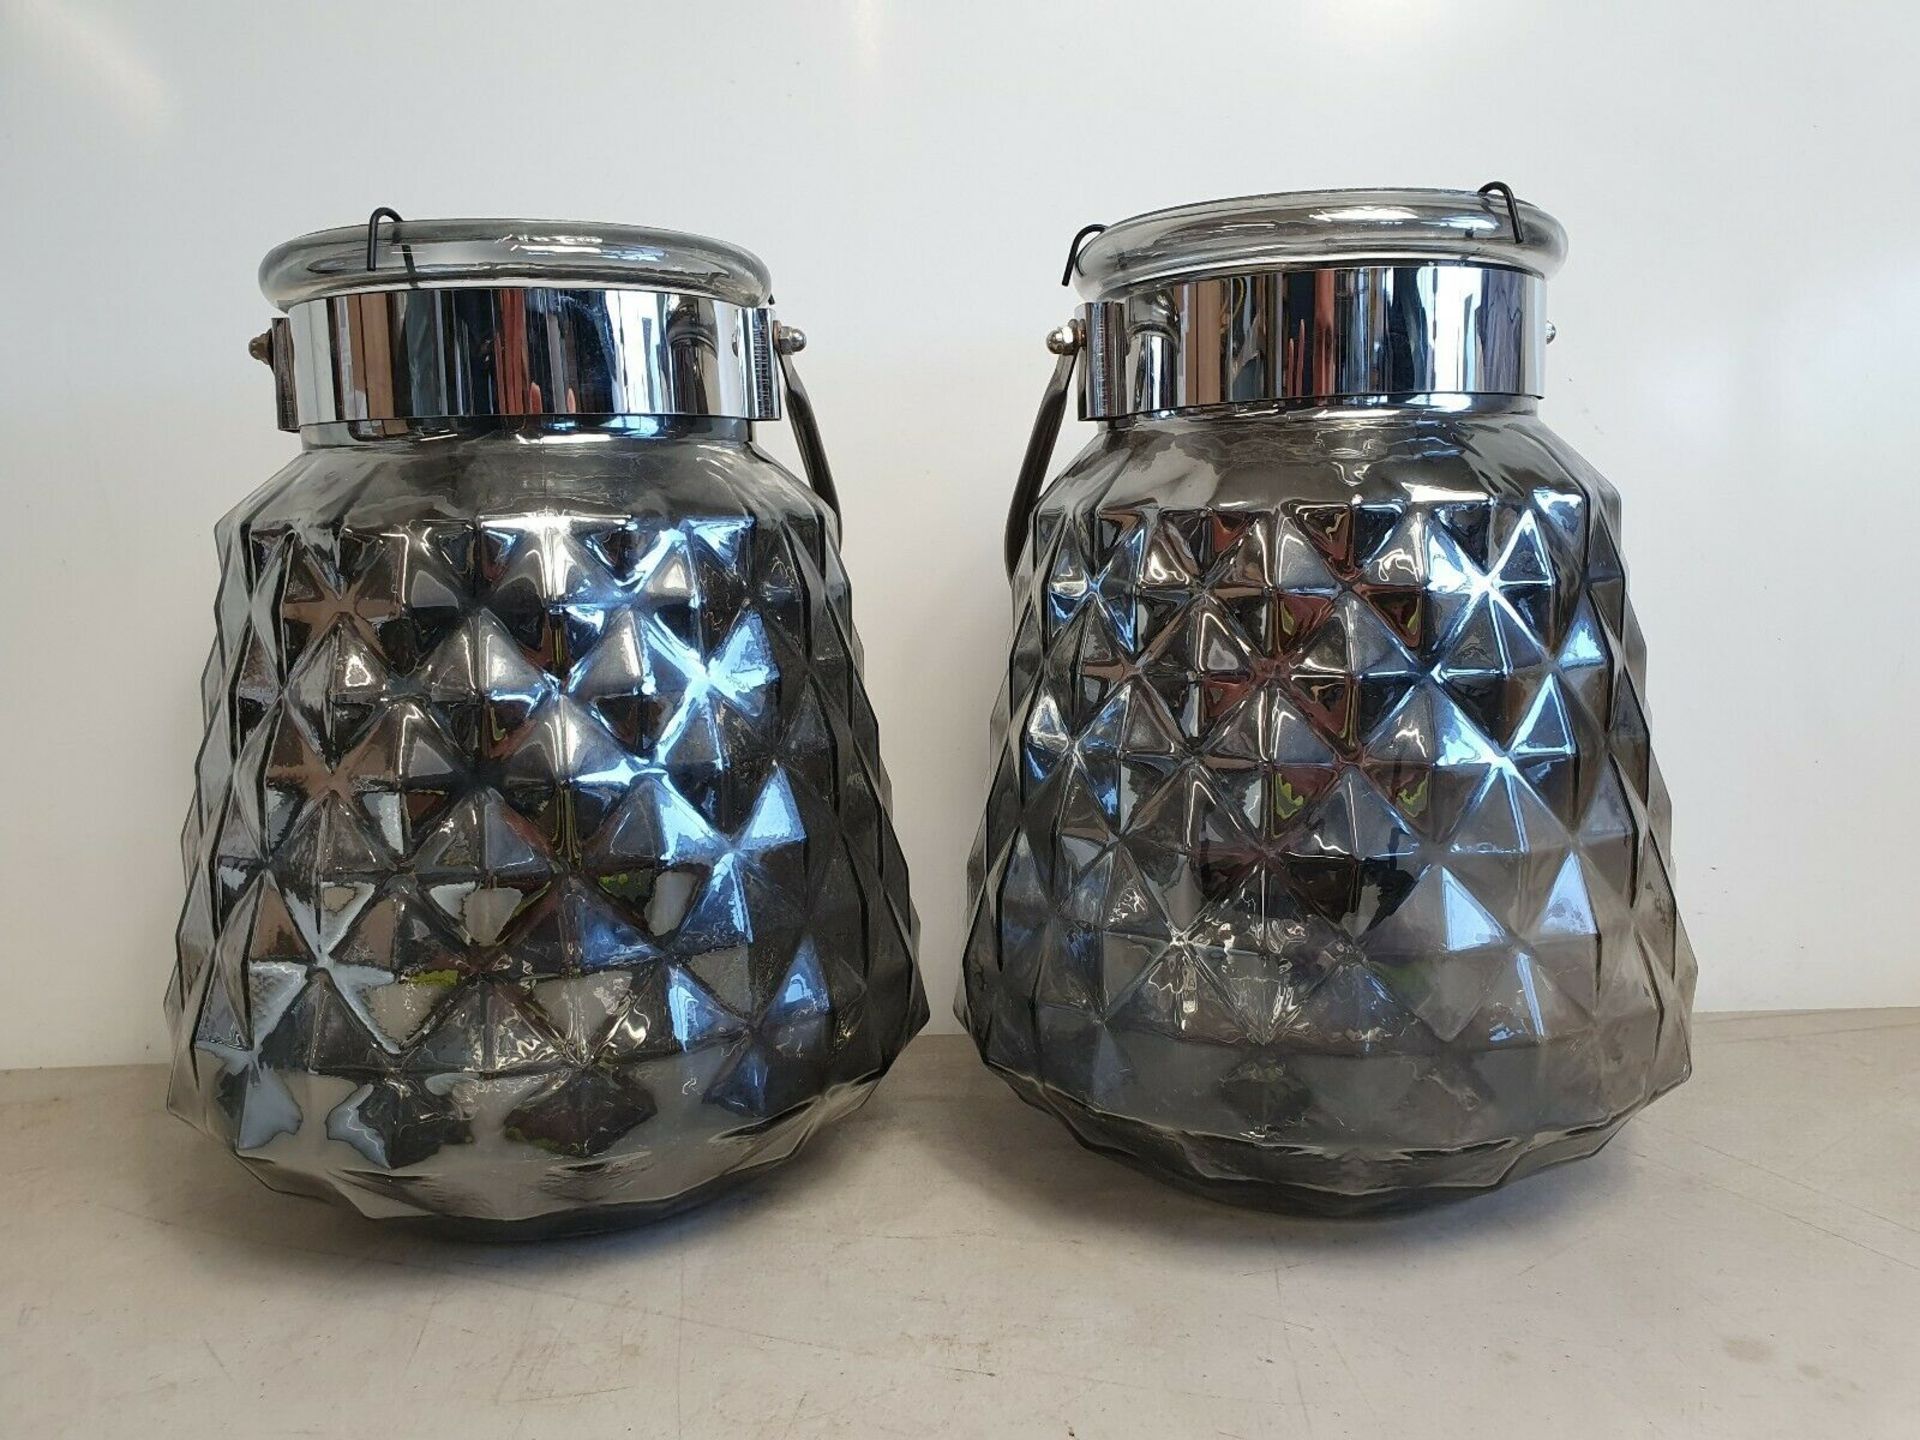 2 x Decorative Tealight Holders with Handle